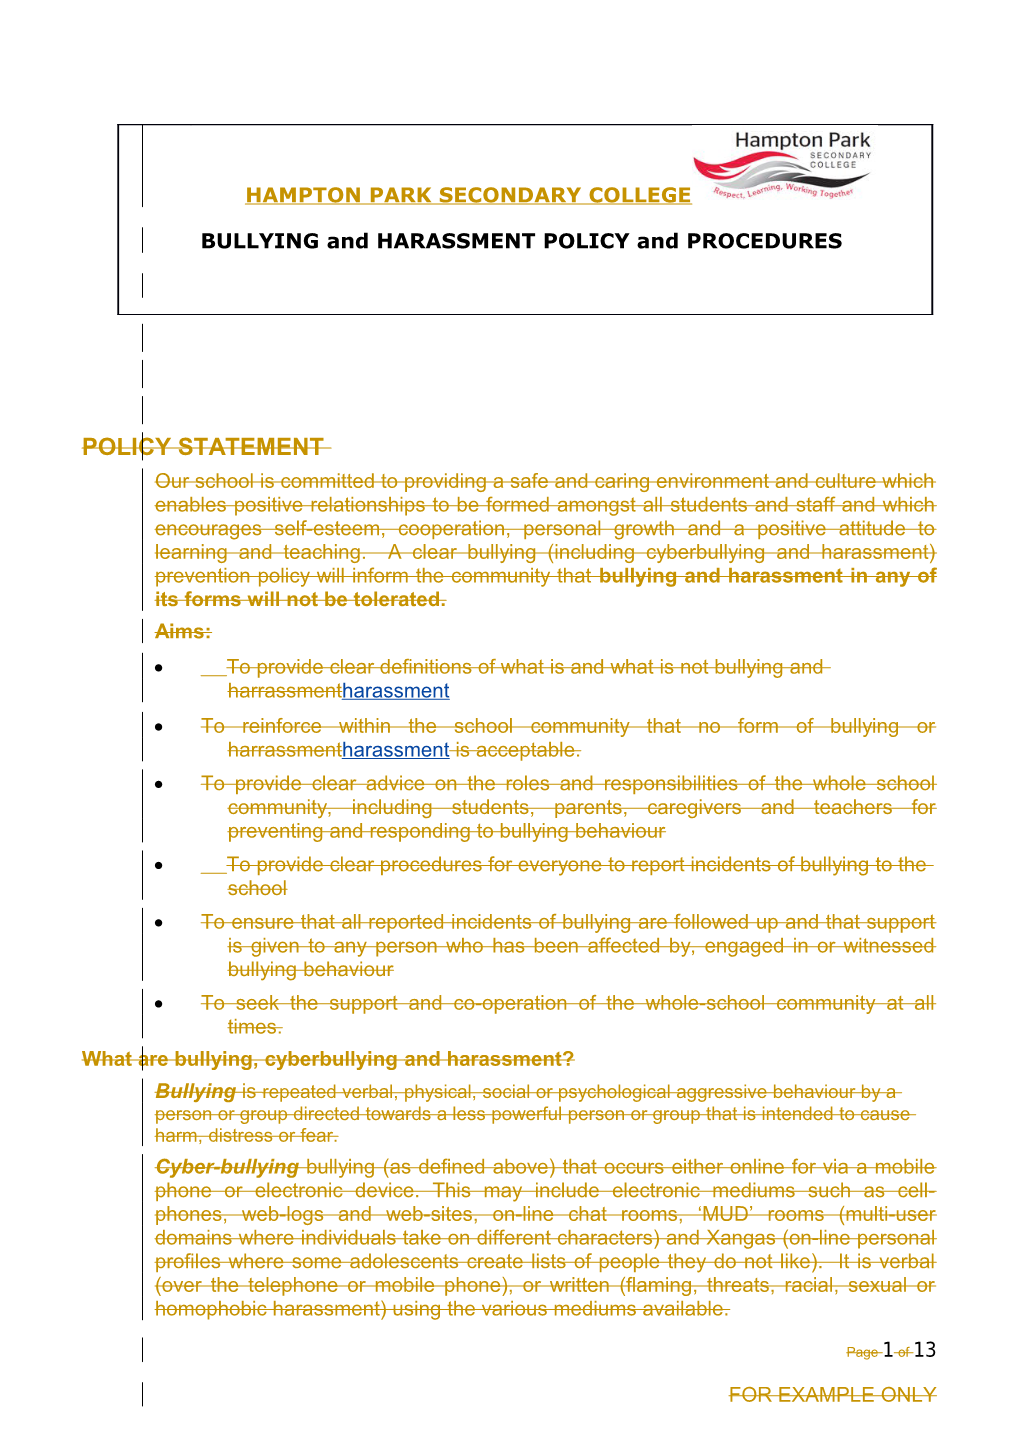 Policy Statement s3